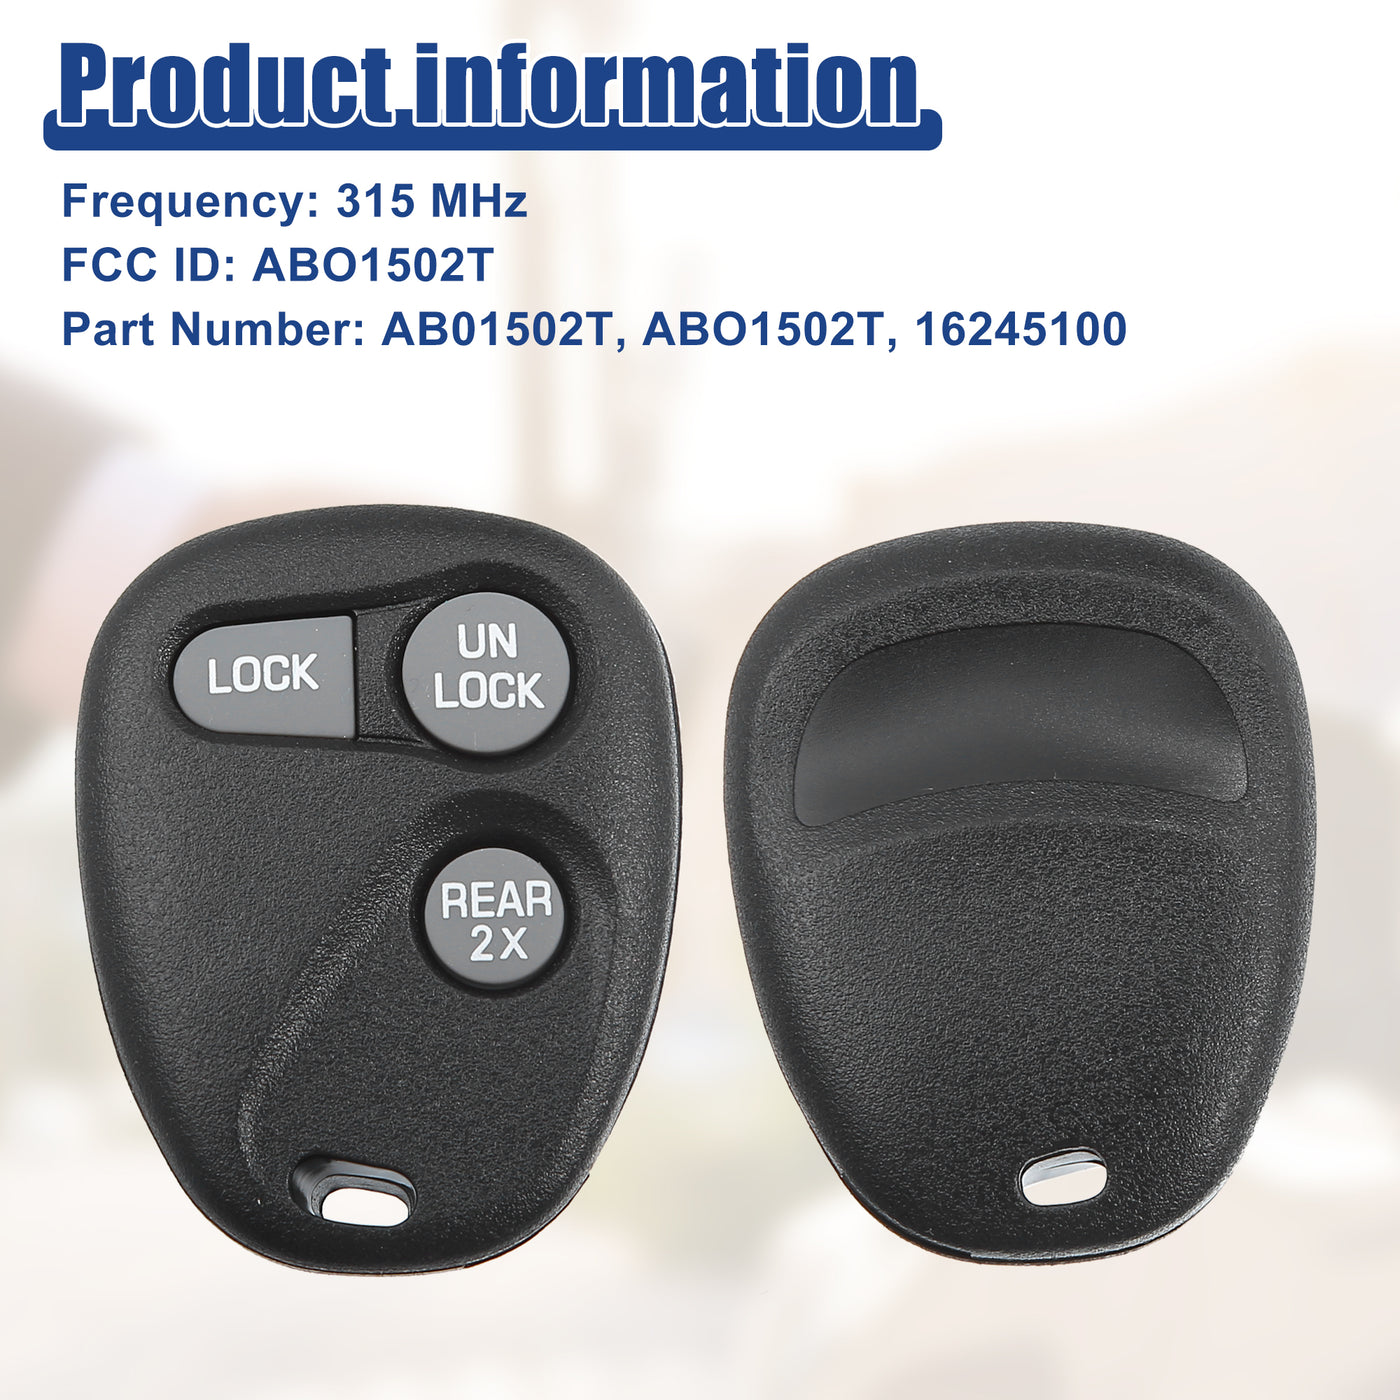 ACROPIX 315 MHz Car Key Fob Keyless Entry Remote Fit for Chevy Express 1500 2500 3500 1998-2002 for GMC Savana 1500 2500 3500 1998-2002 AB01502T 16245100 - Pack of 1 Black